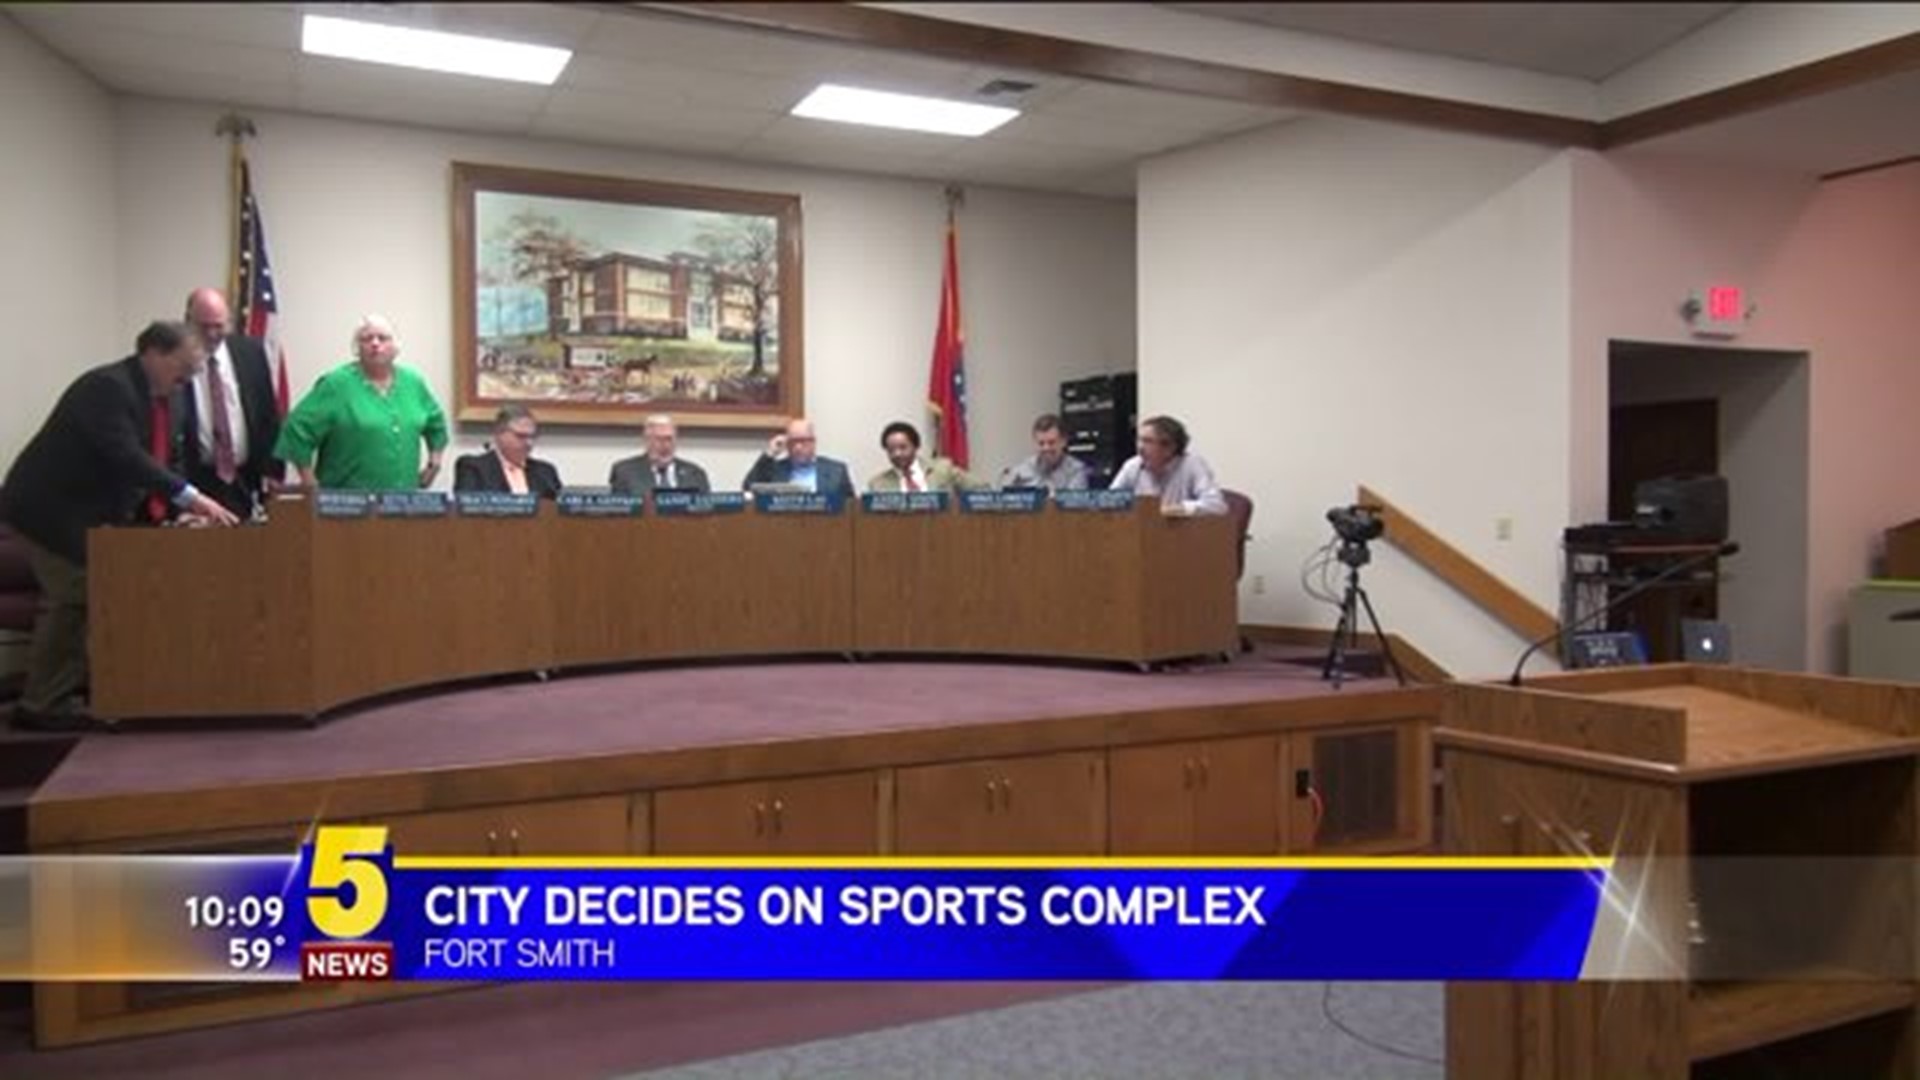 City Decides On Sports Complex